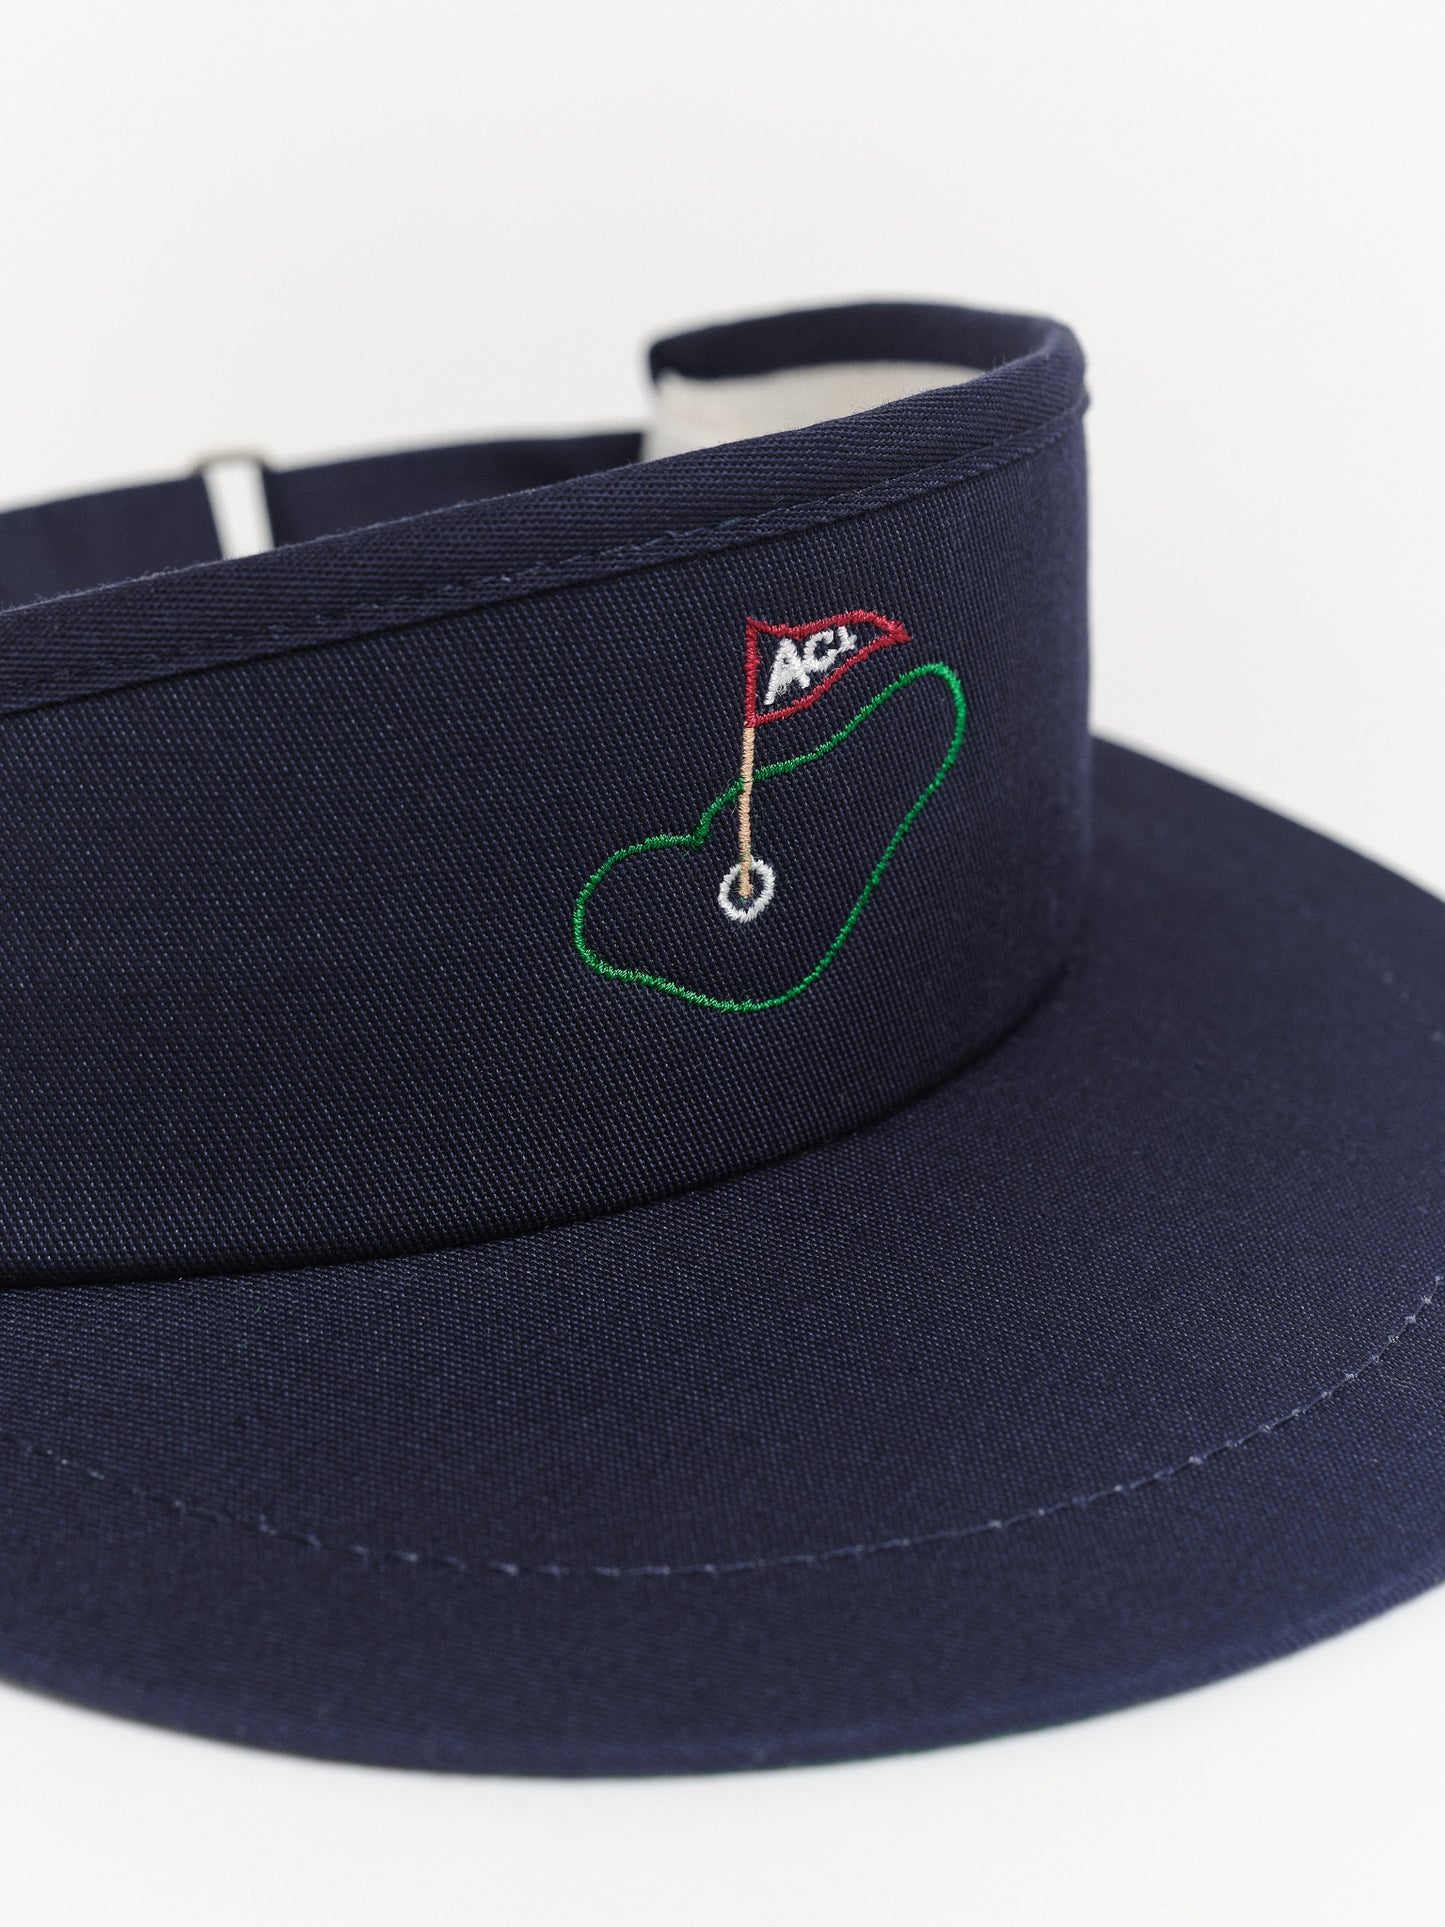 ACL Tour Visor in Navy